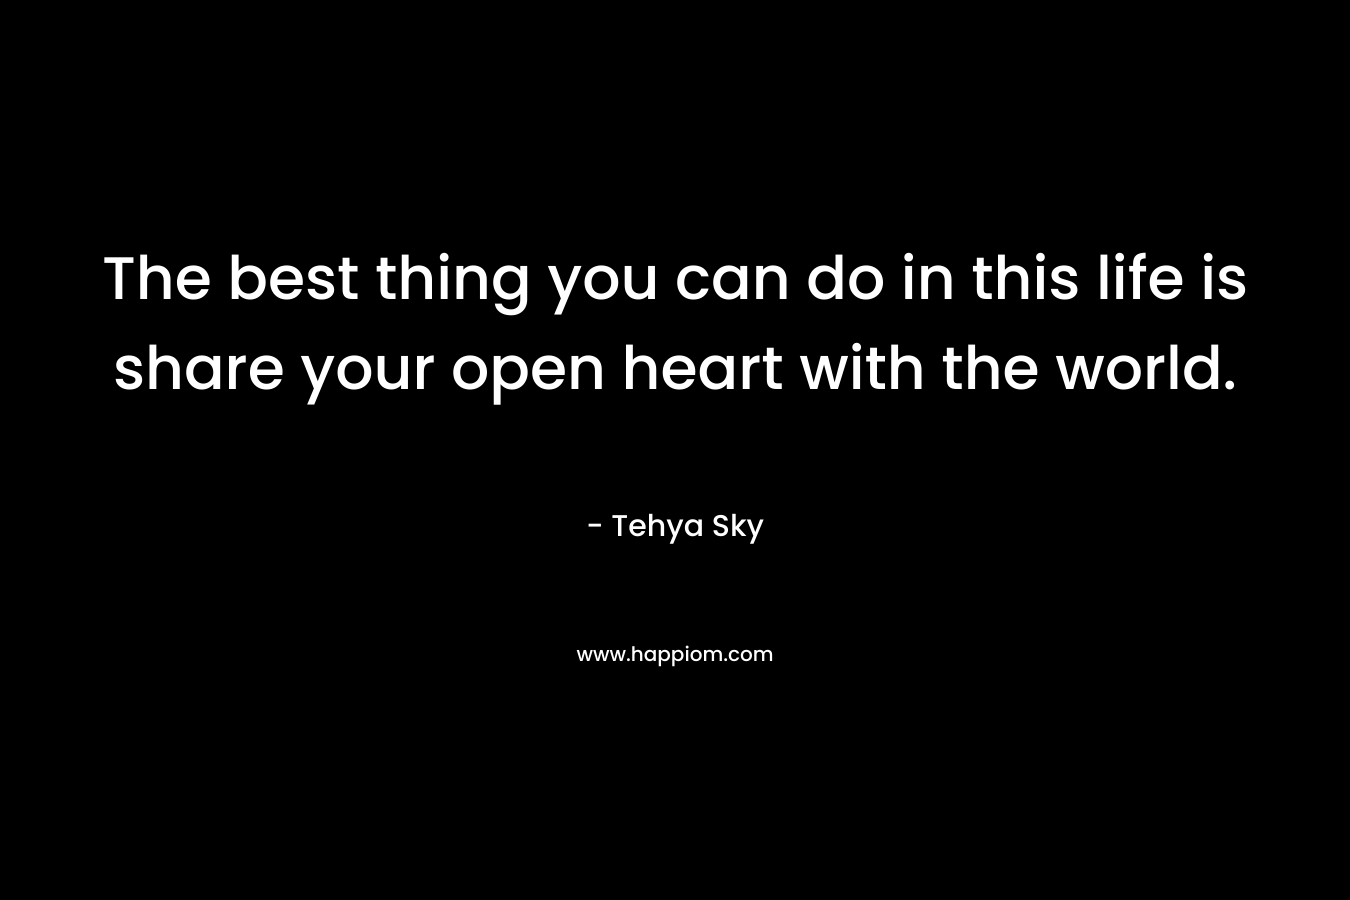 The best thing you can do in this life is share your open heart with the world. – Tehya Sky